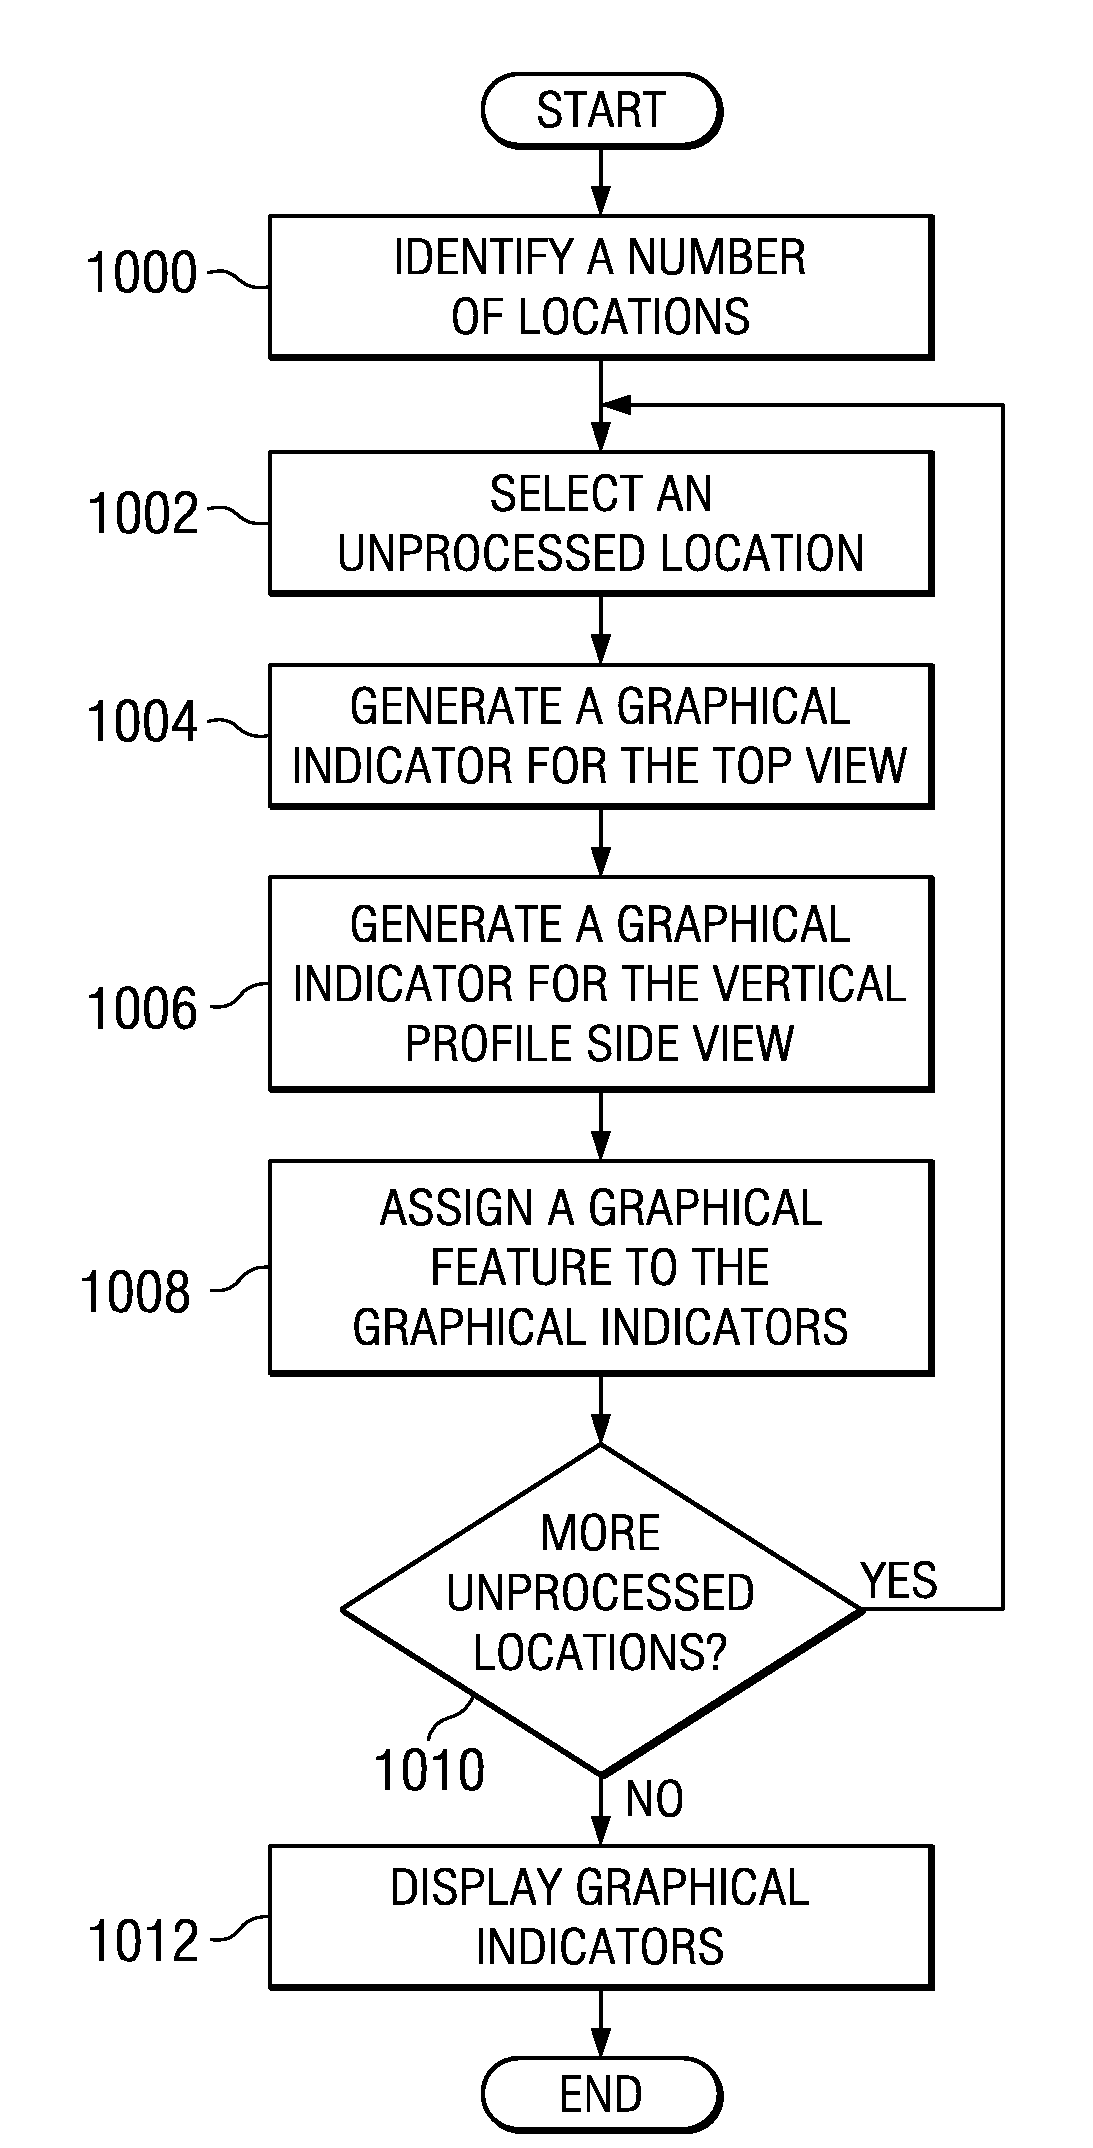 Method and Apparatus for Displaying Vertical Terrain Information